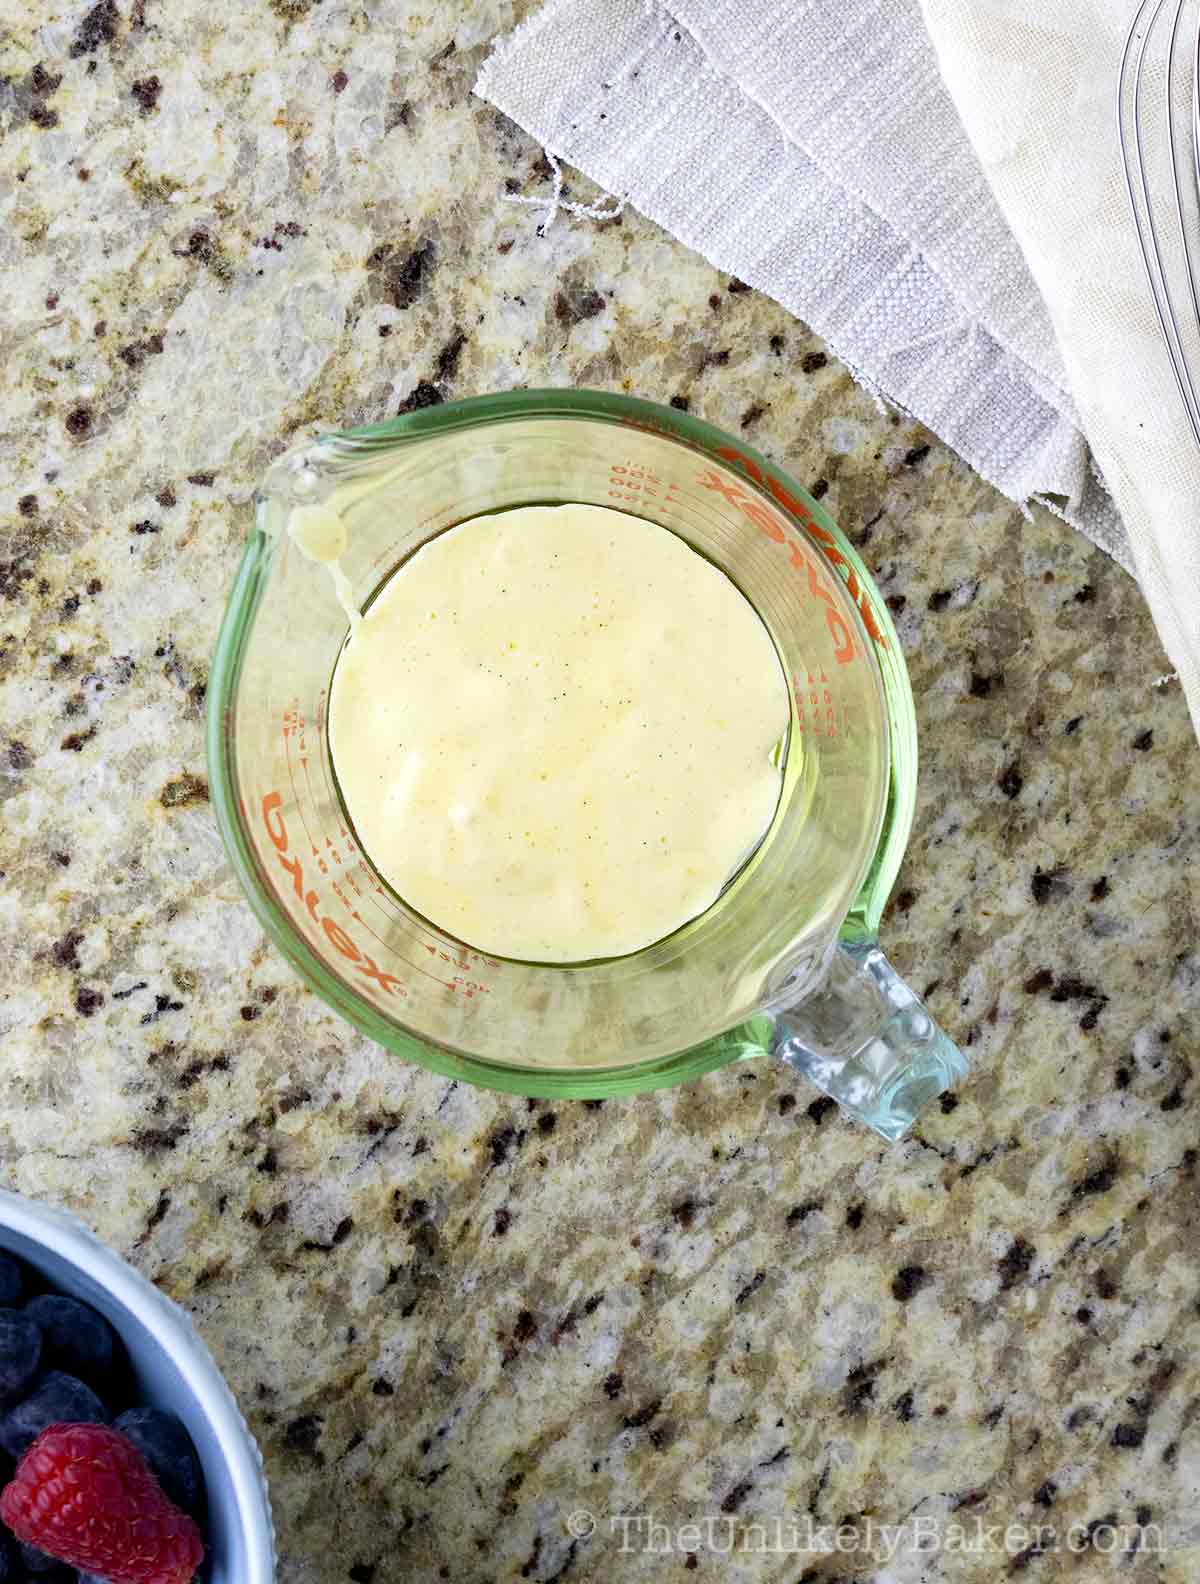 Cake batter with oil in a measuring cup.